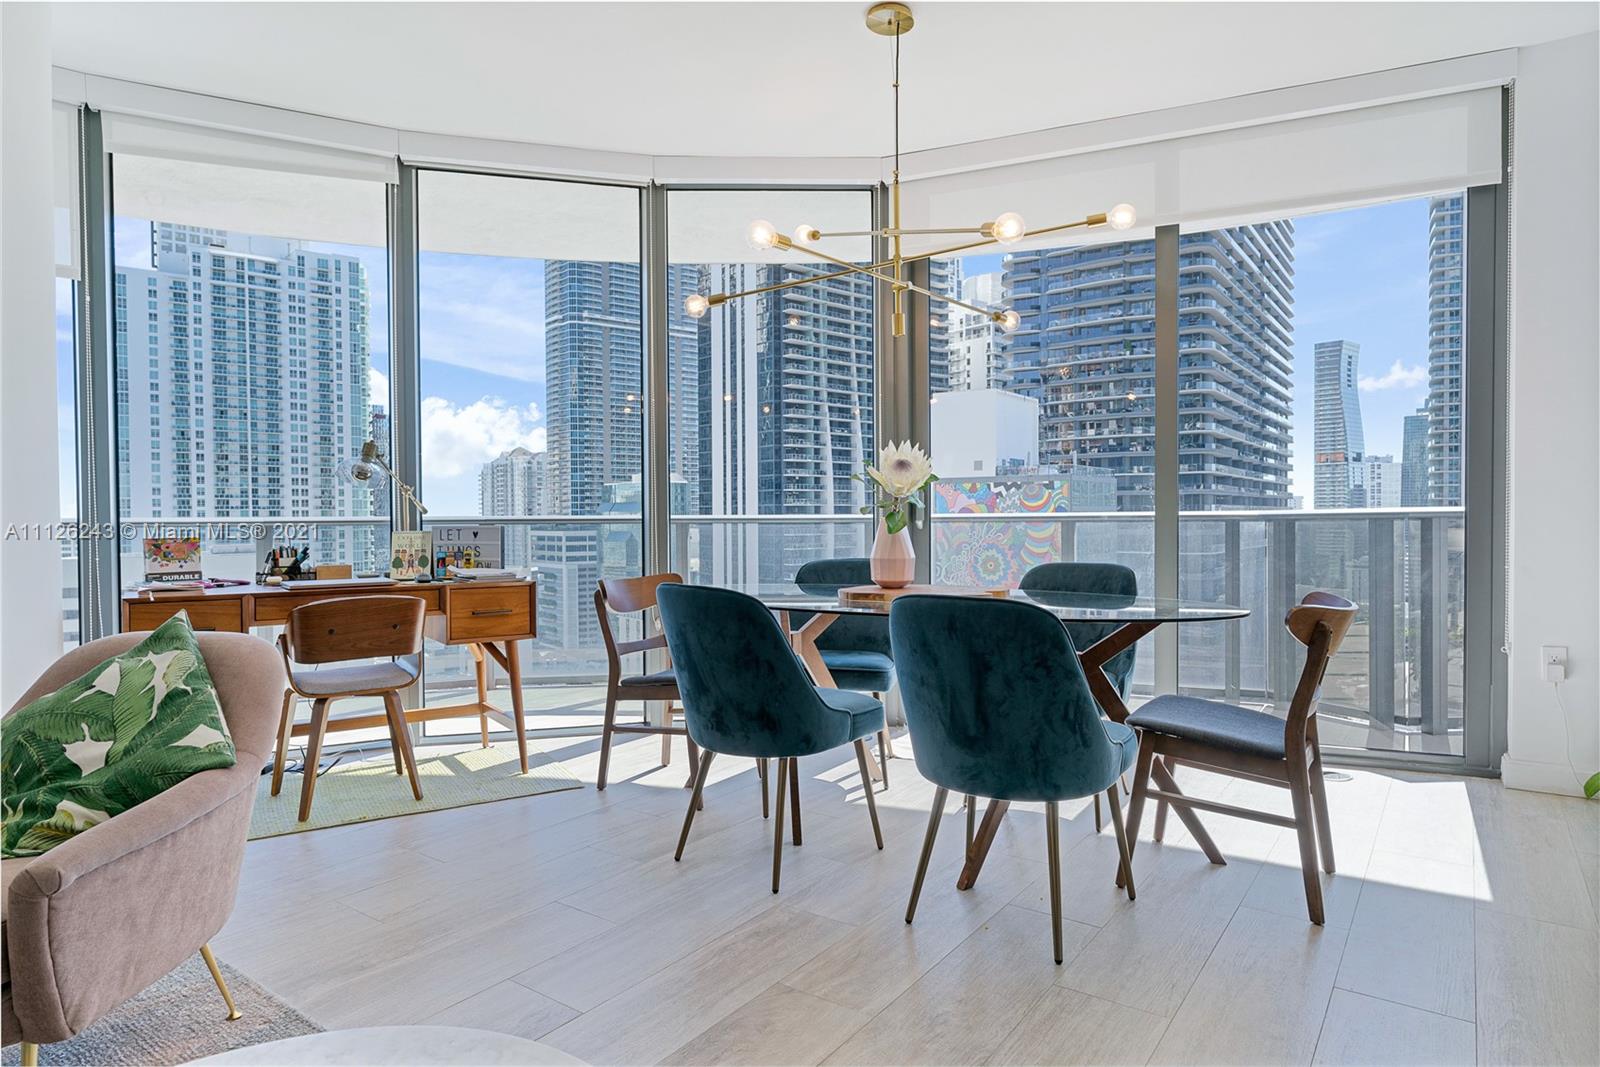 Brickell Heights East Tower image #49